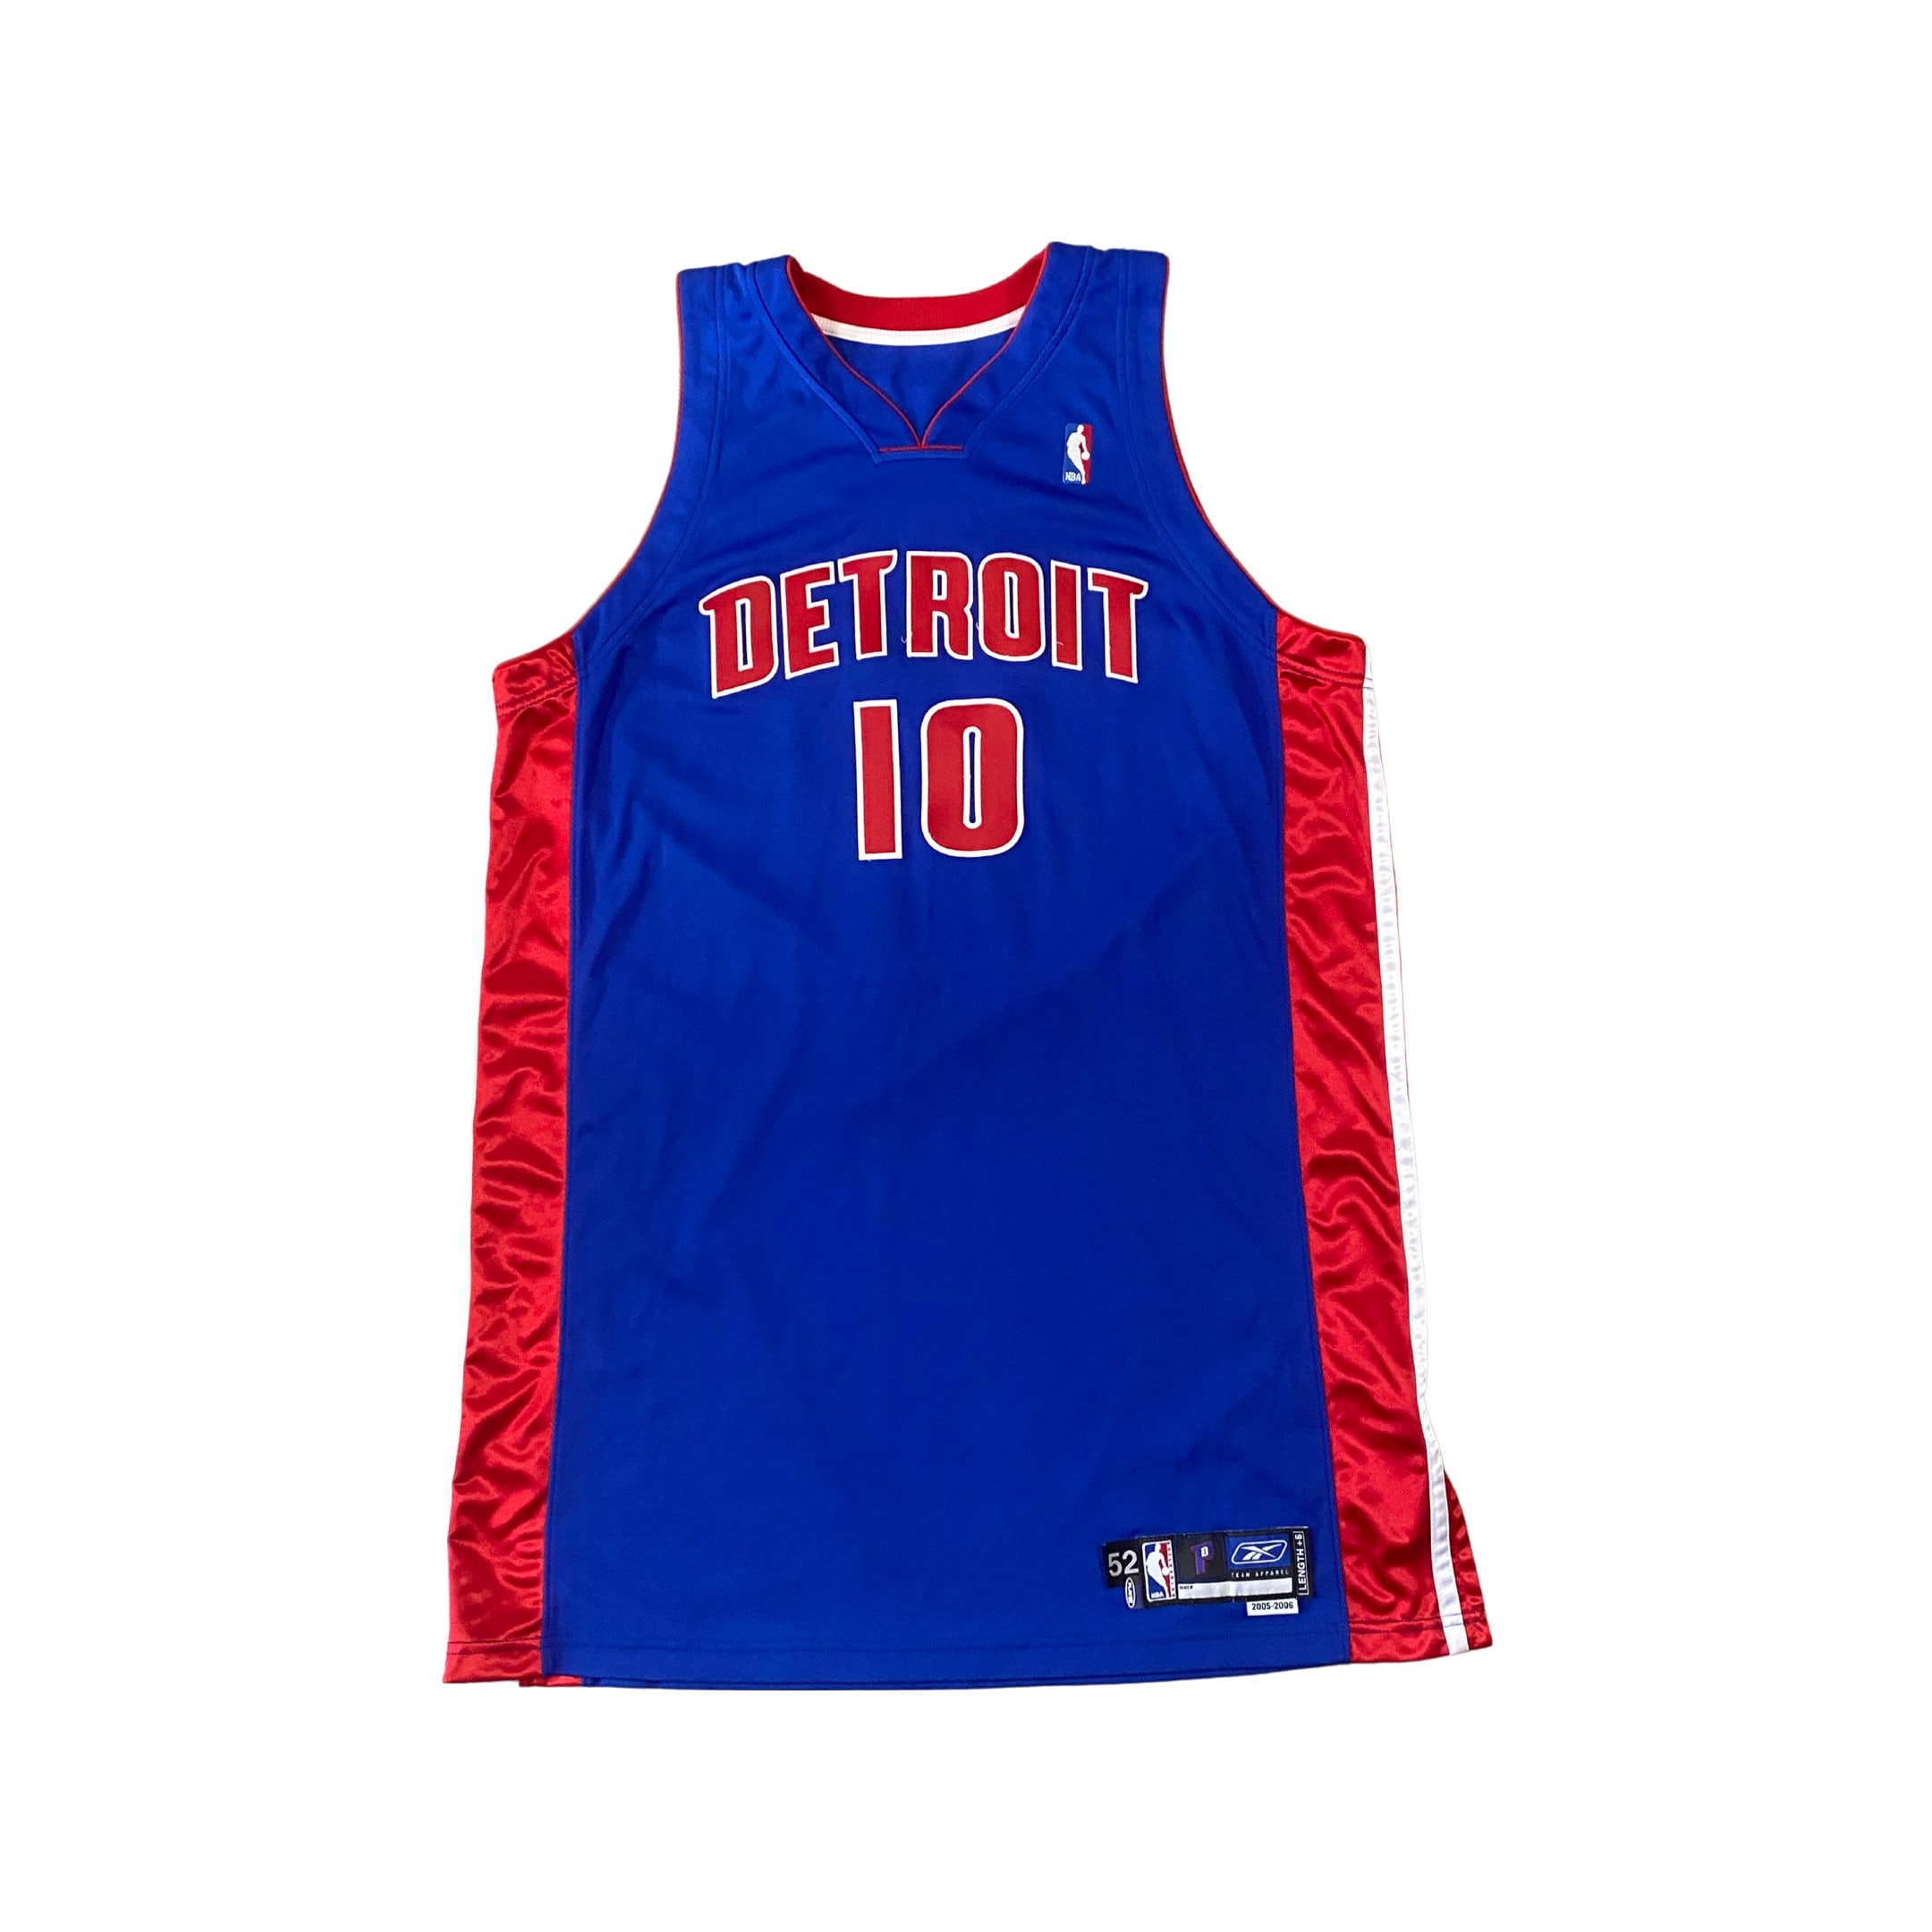 New Nike NBA Authentics Detroit Pistons Team Issued on Court 